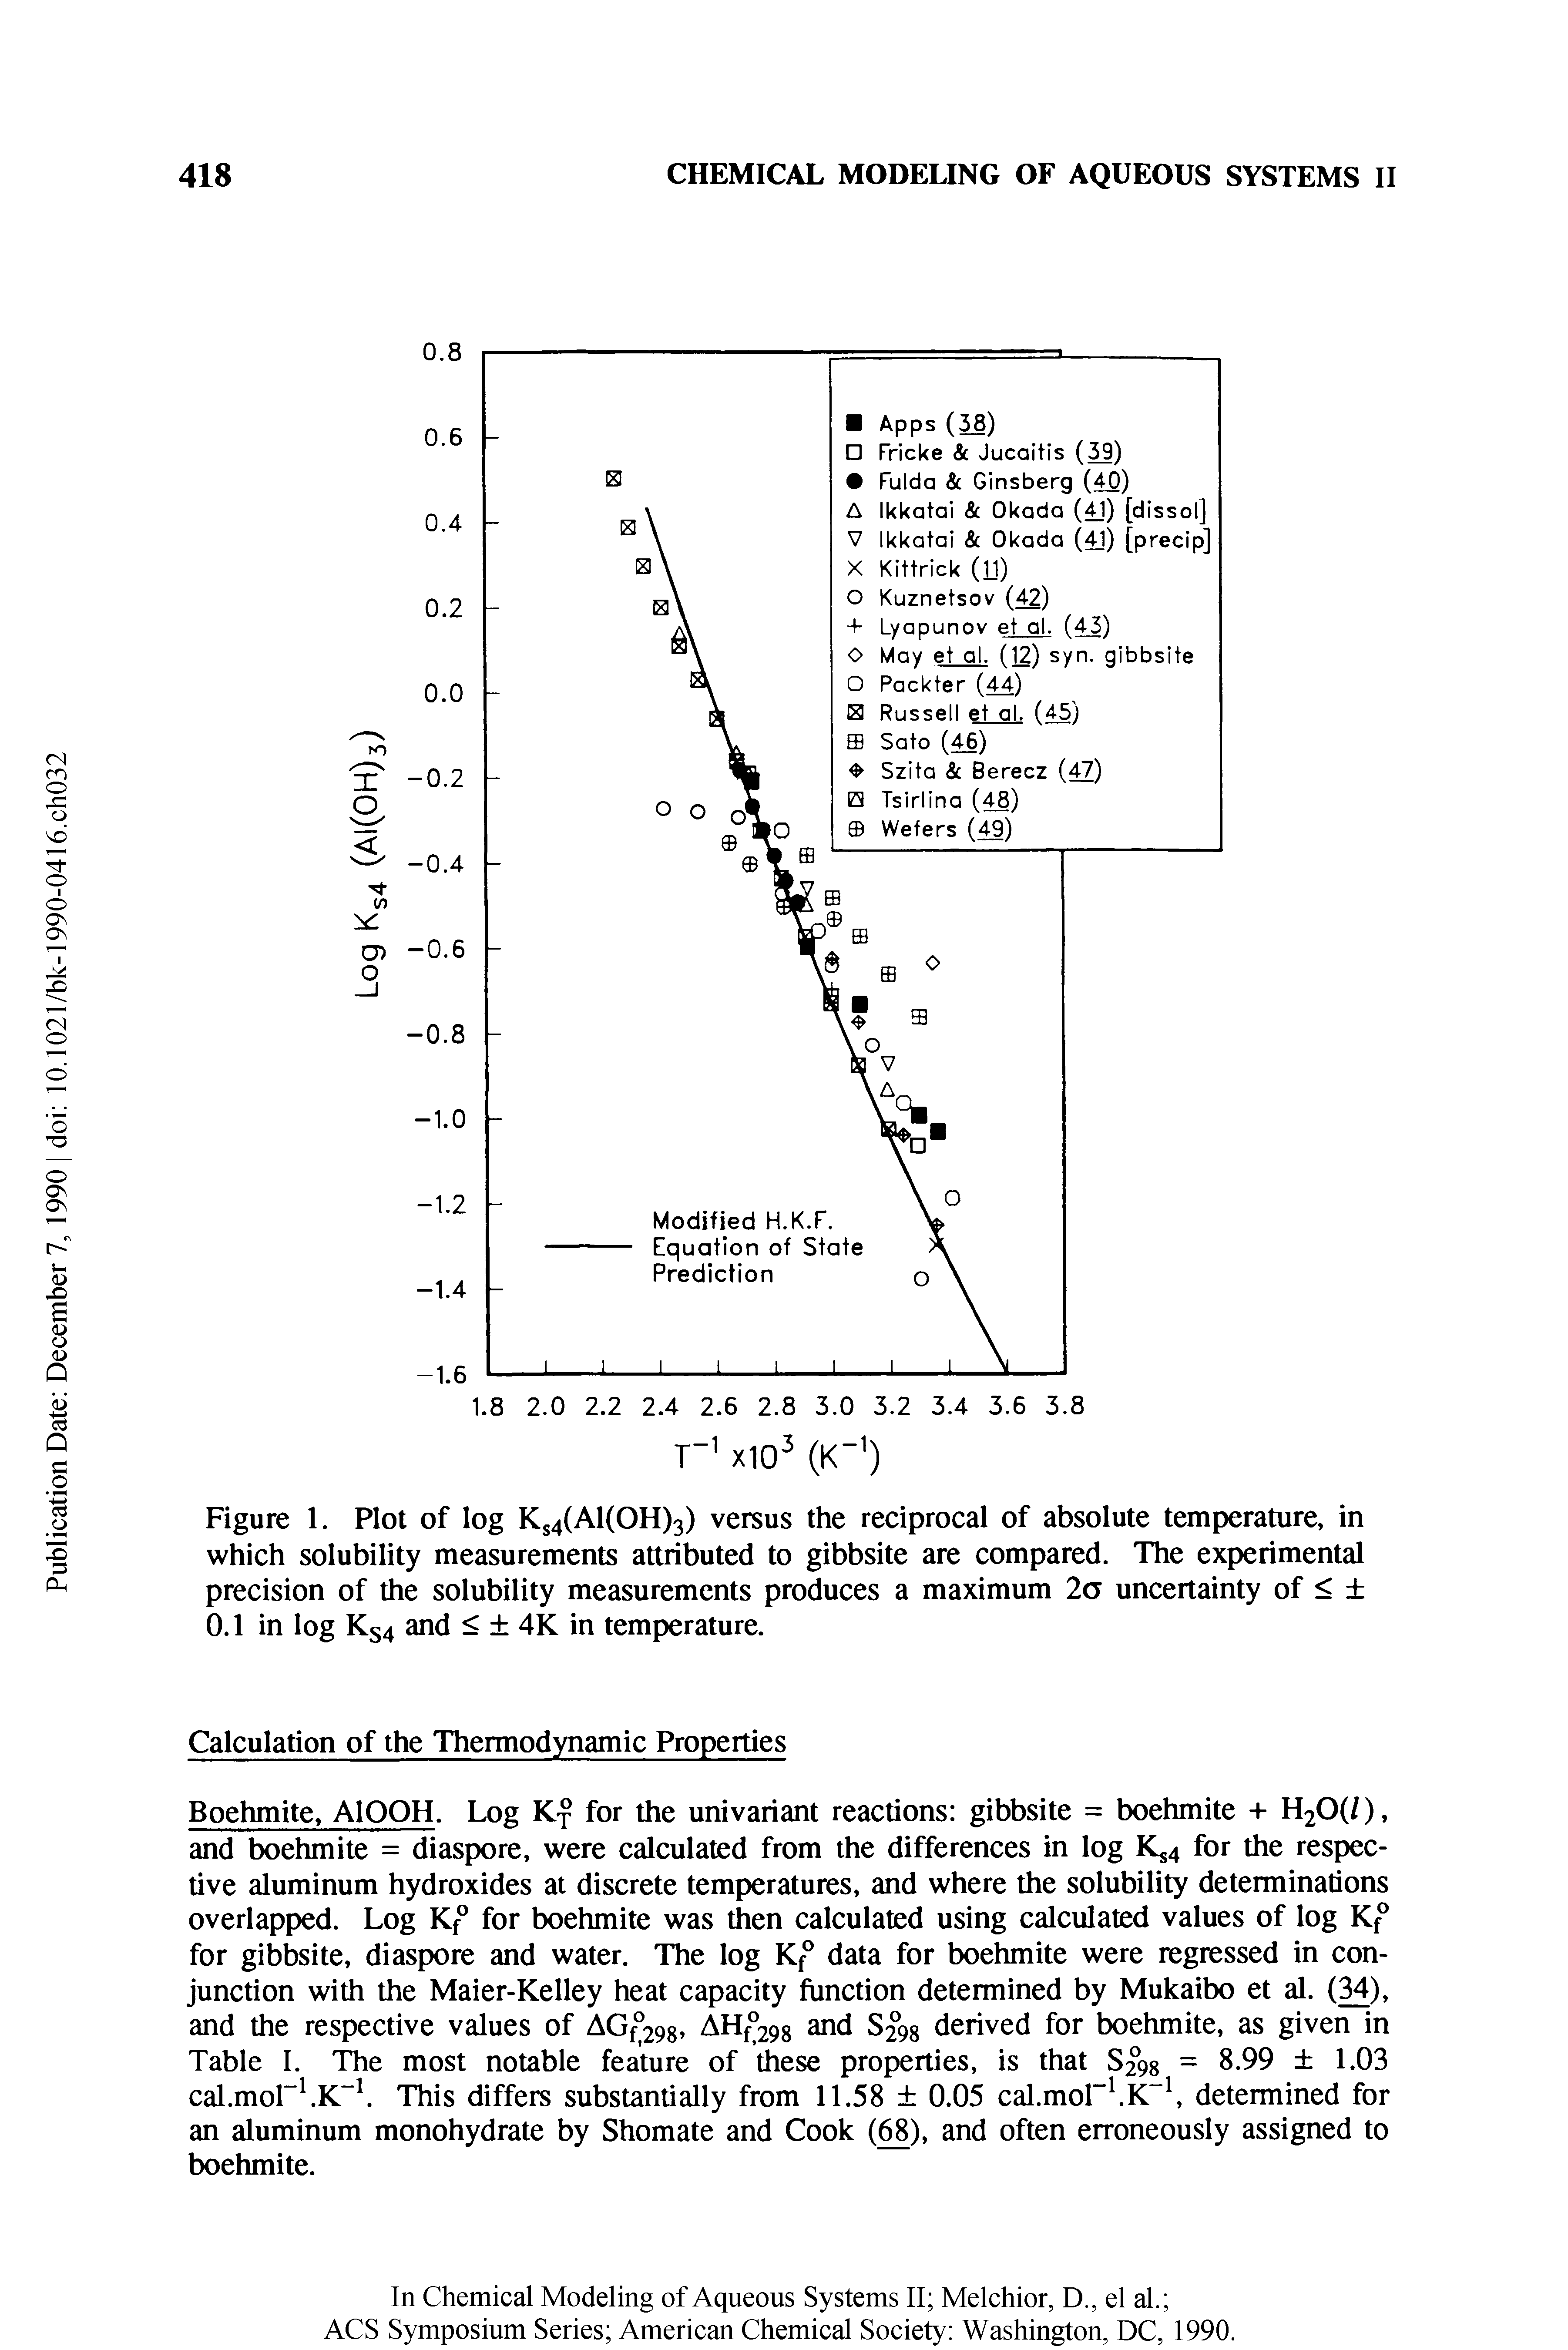 Figure 1. Plot of log Ks4(Al(OH)3) versus the reciprocal of absolute temperature, in which solubility measurements attributed to gibbsite are compared. The experimental precision of the solubility measurements produces a maximum 2a uncertainty of < 0.1 in log Ks4 and < 4K in temperature.